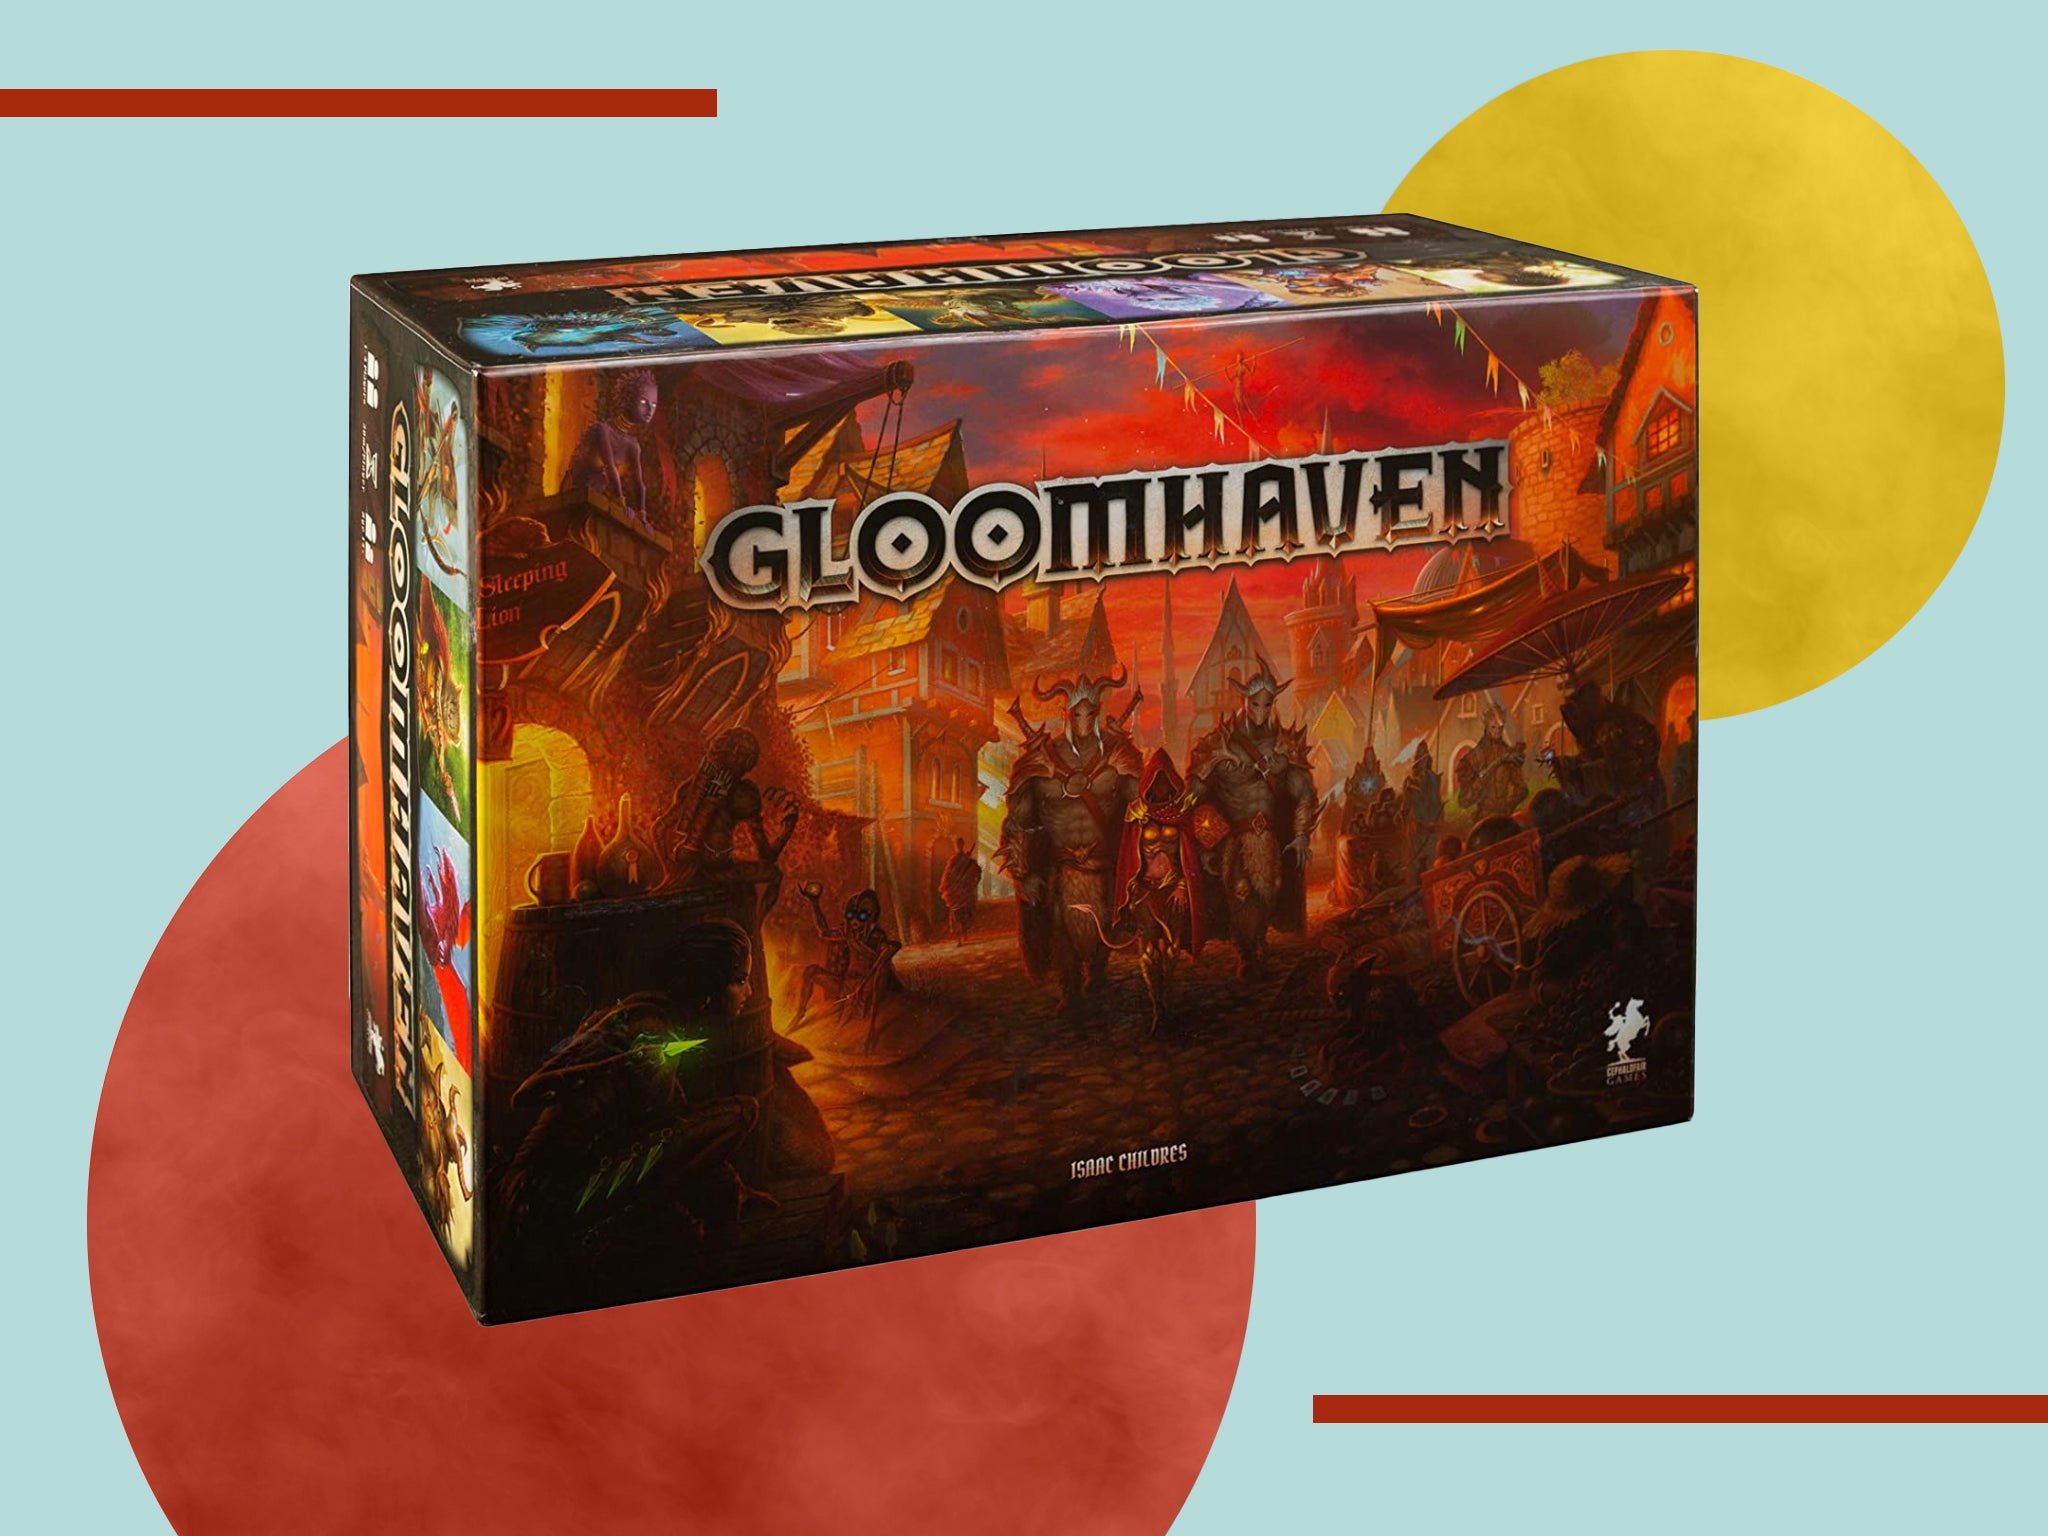 Take your mind of the heat and enjoy the ‘evolving narrative’ of Gloomhaven